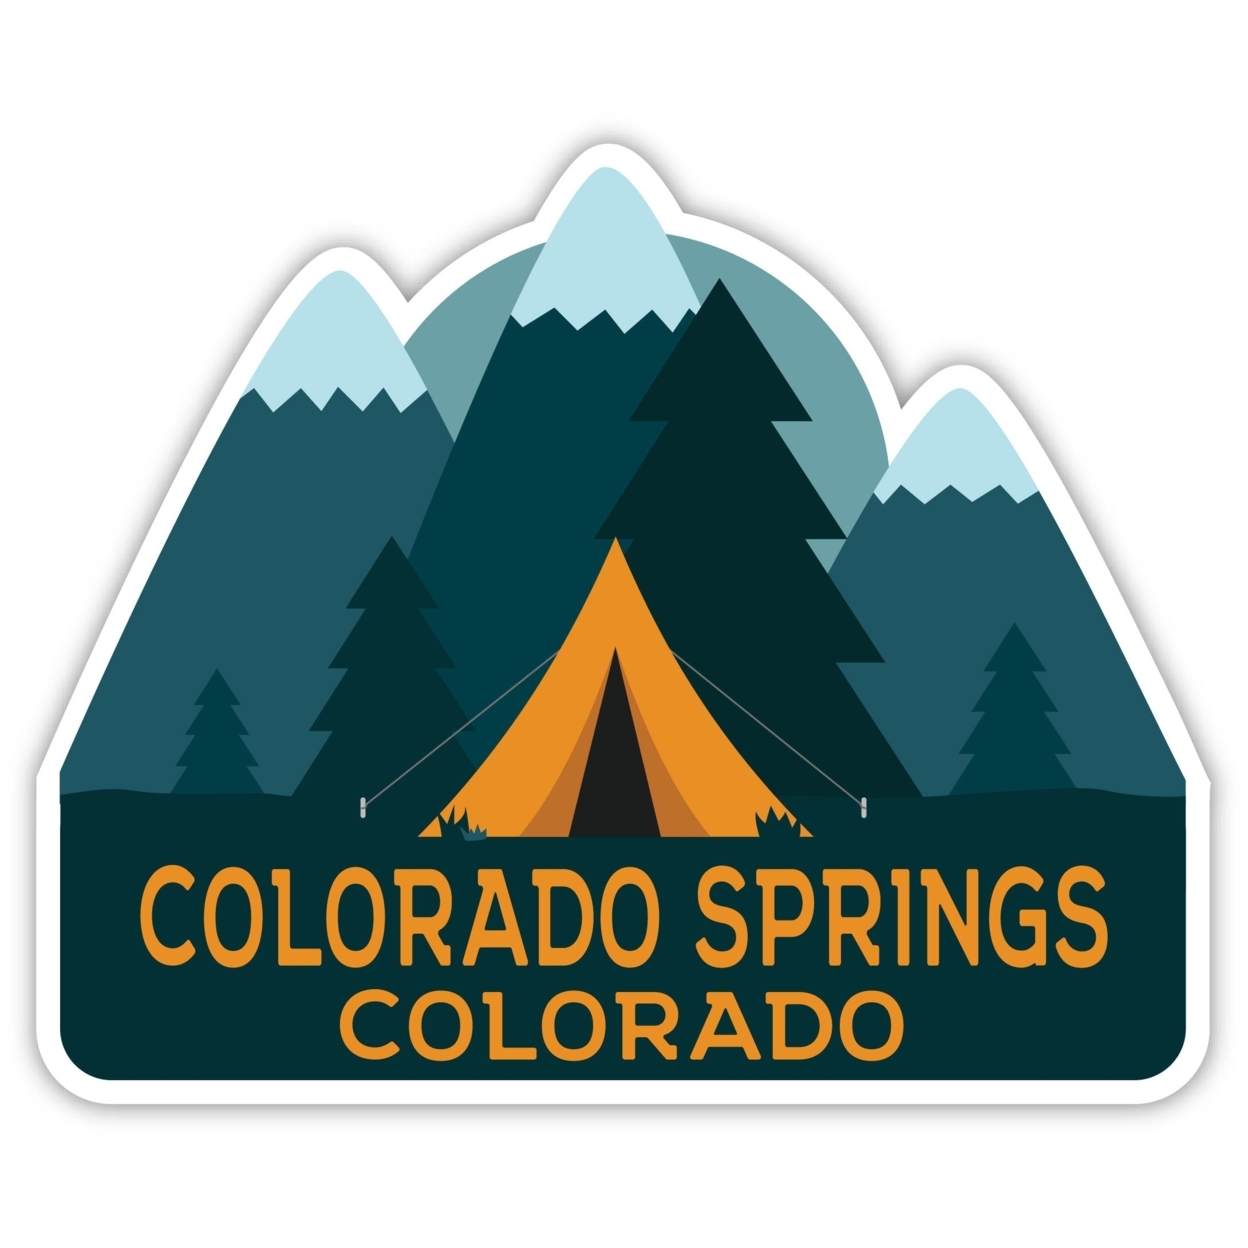 Colorado Springs Colorado Souvenir Decorative Stickers (Choose Theme And Size) - 4-Pack, 12-Inch, Great Outdoors